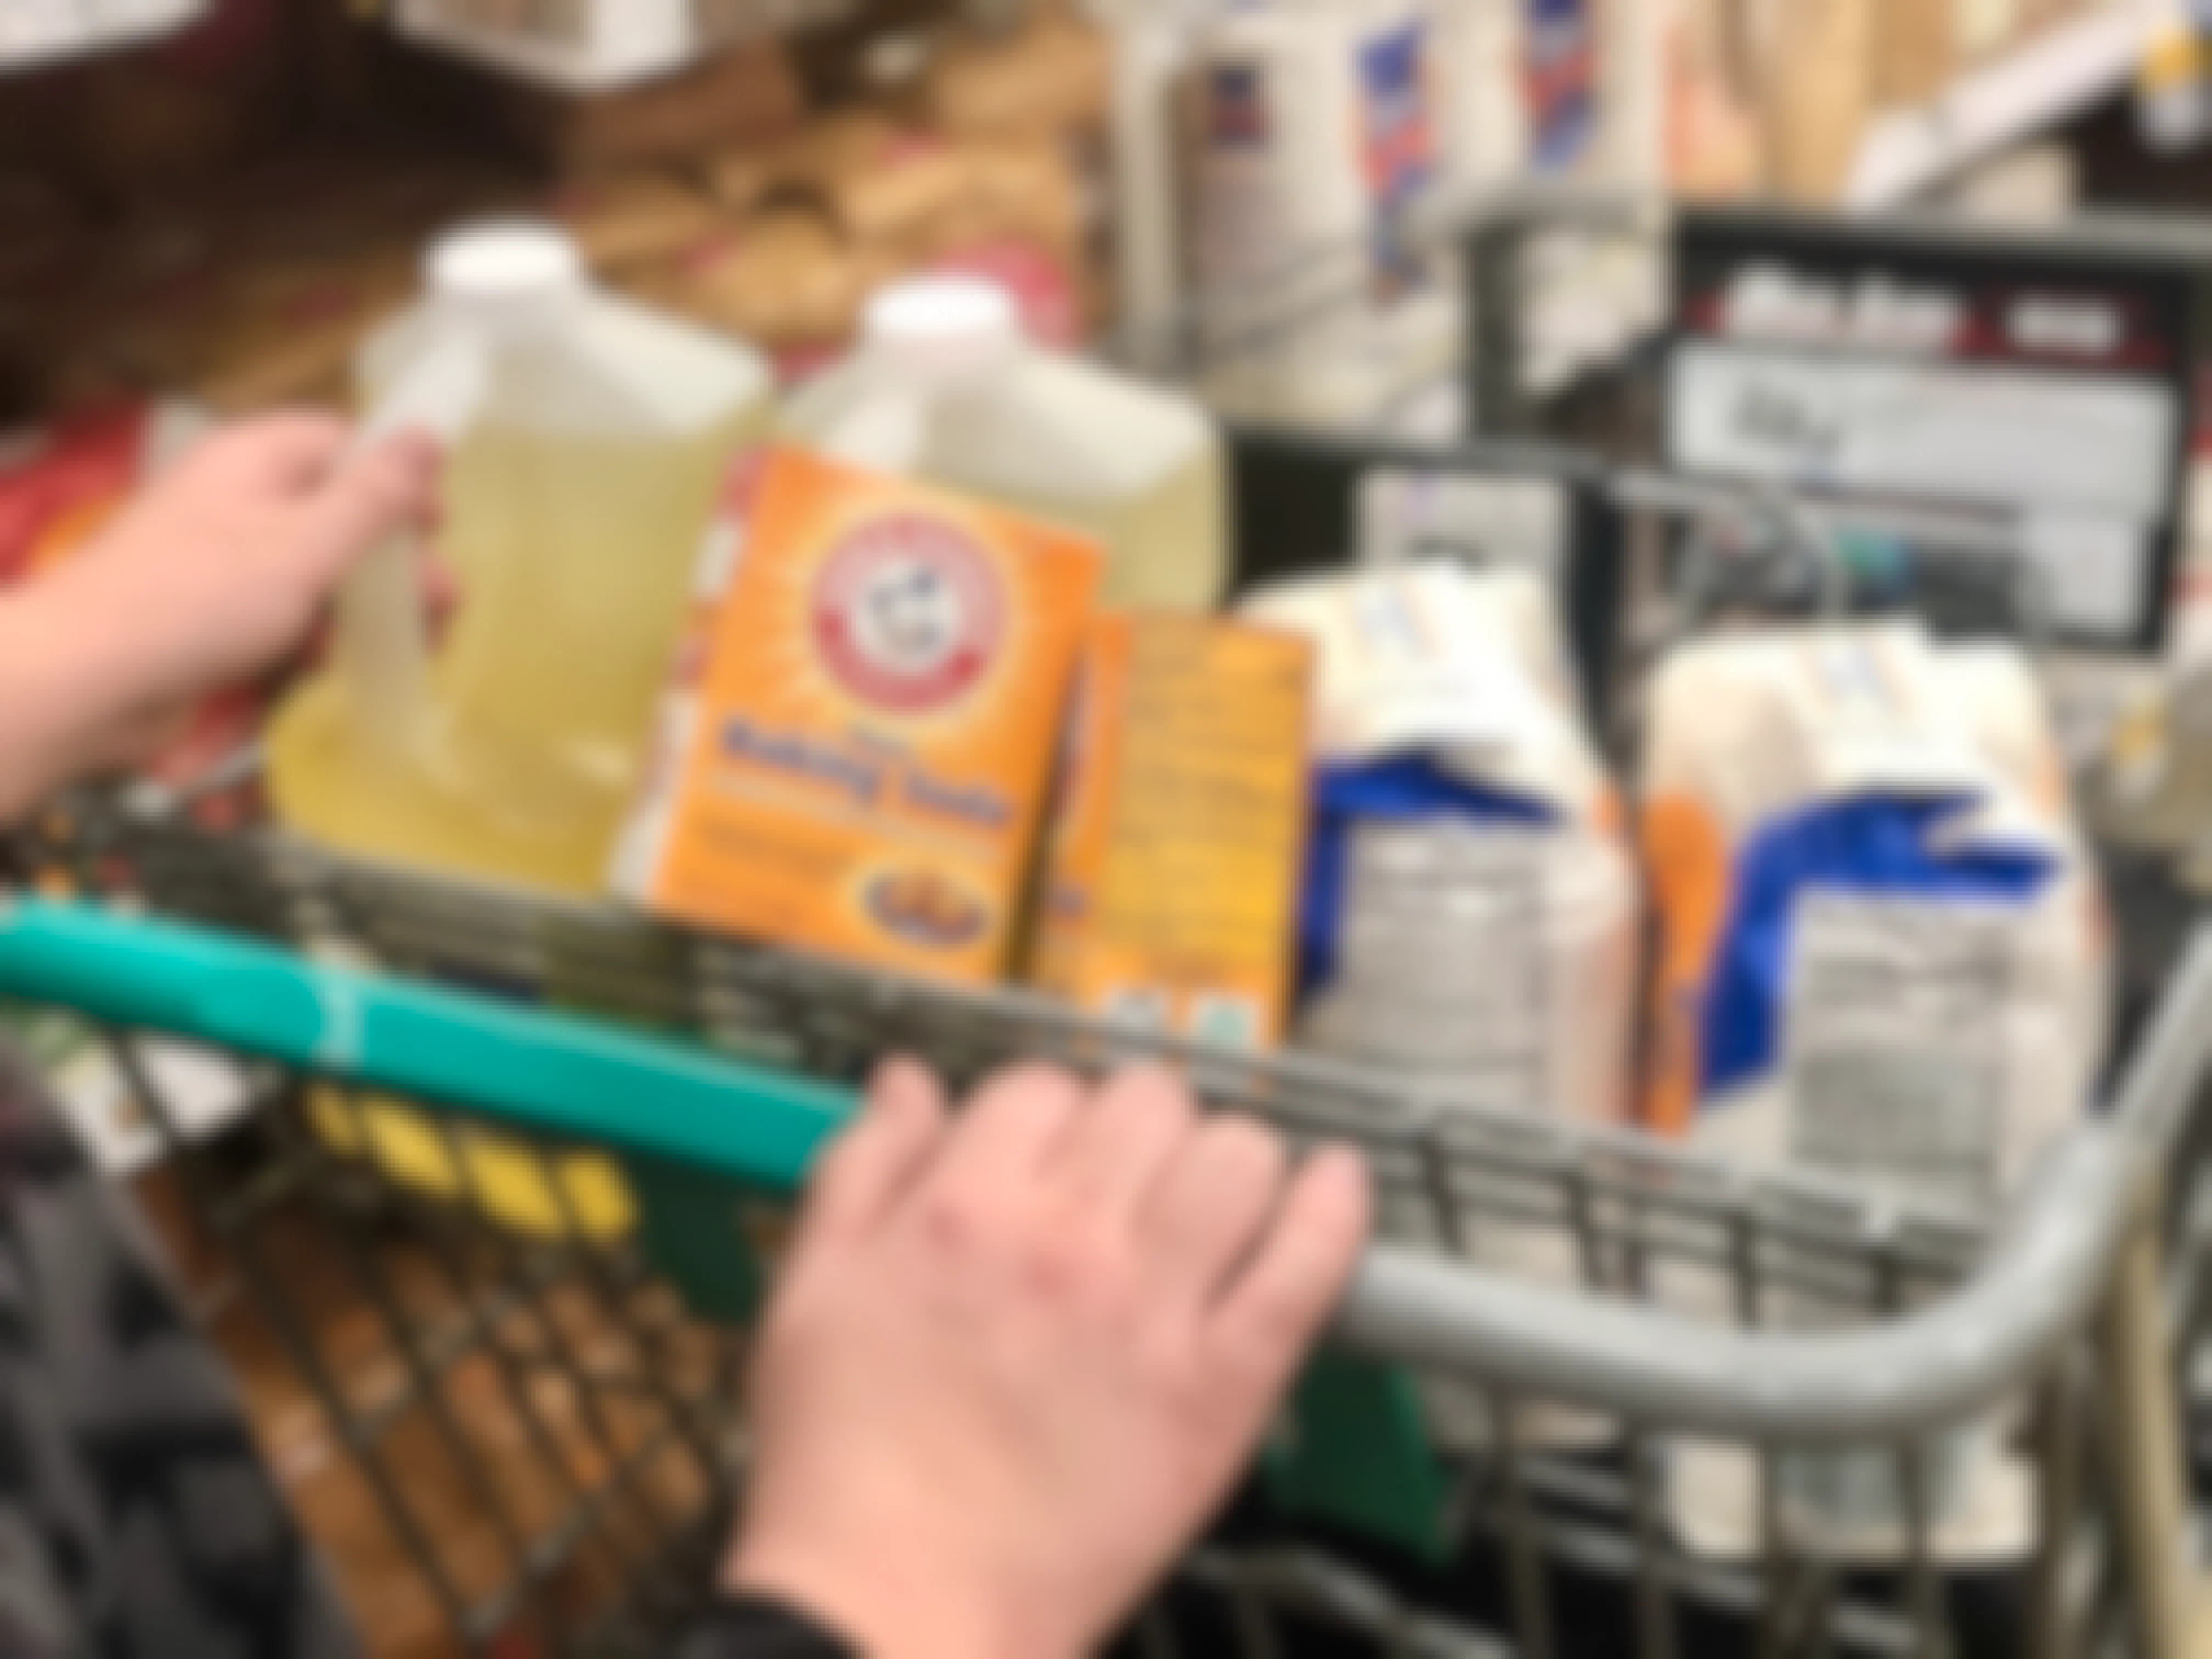 A woman has a cart full of pantry items.